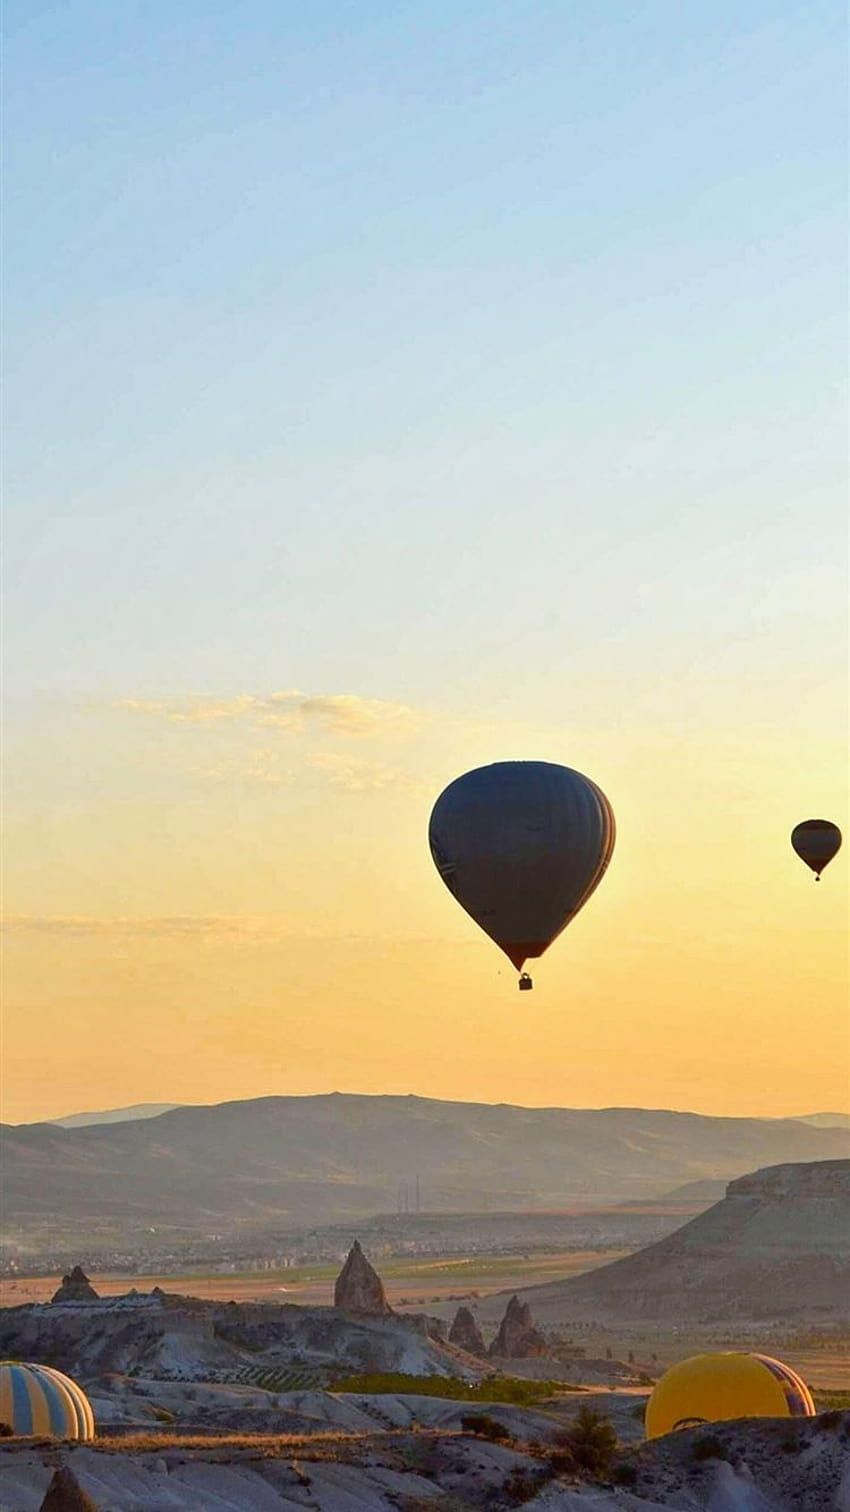 Hot air balloons flying over the mountains during sunset - Hot air balloons